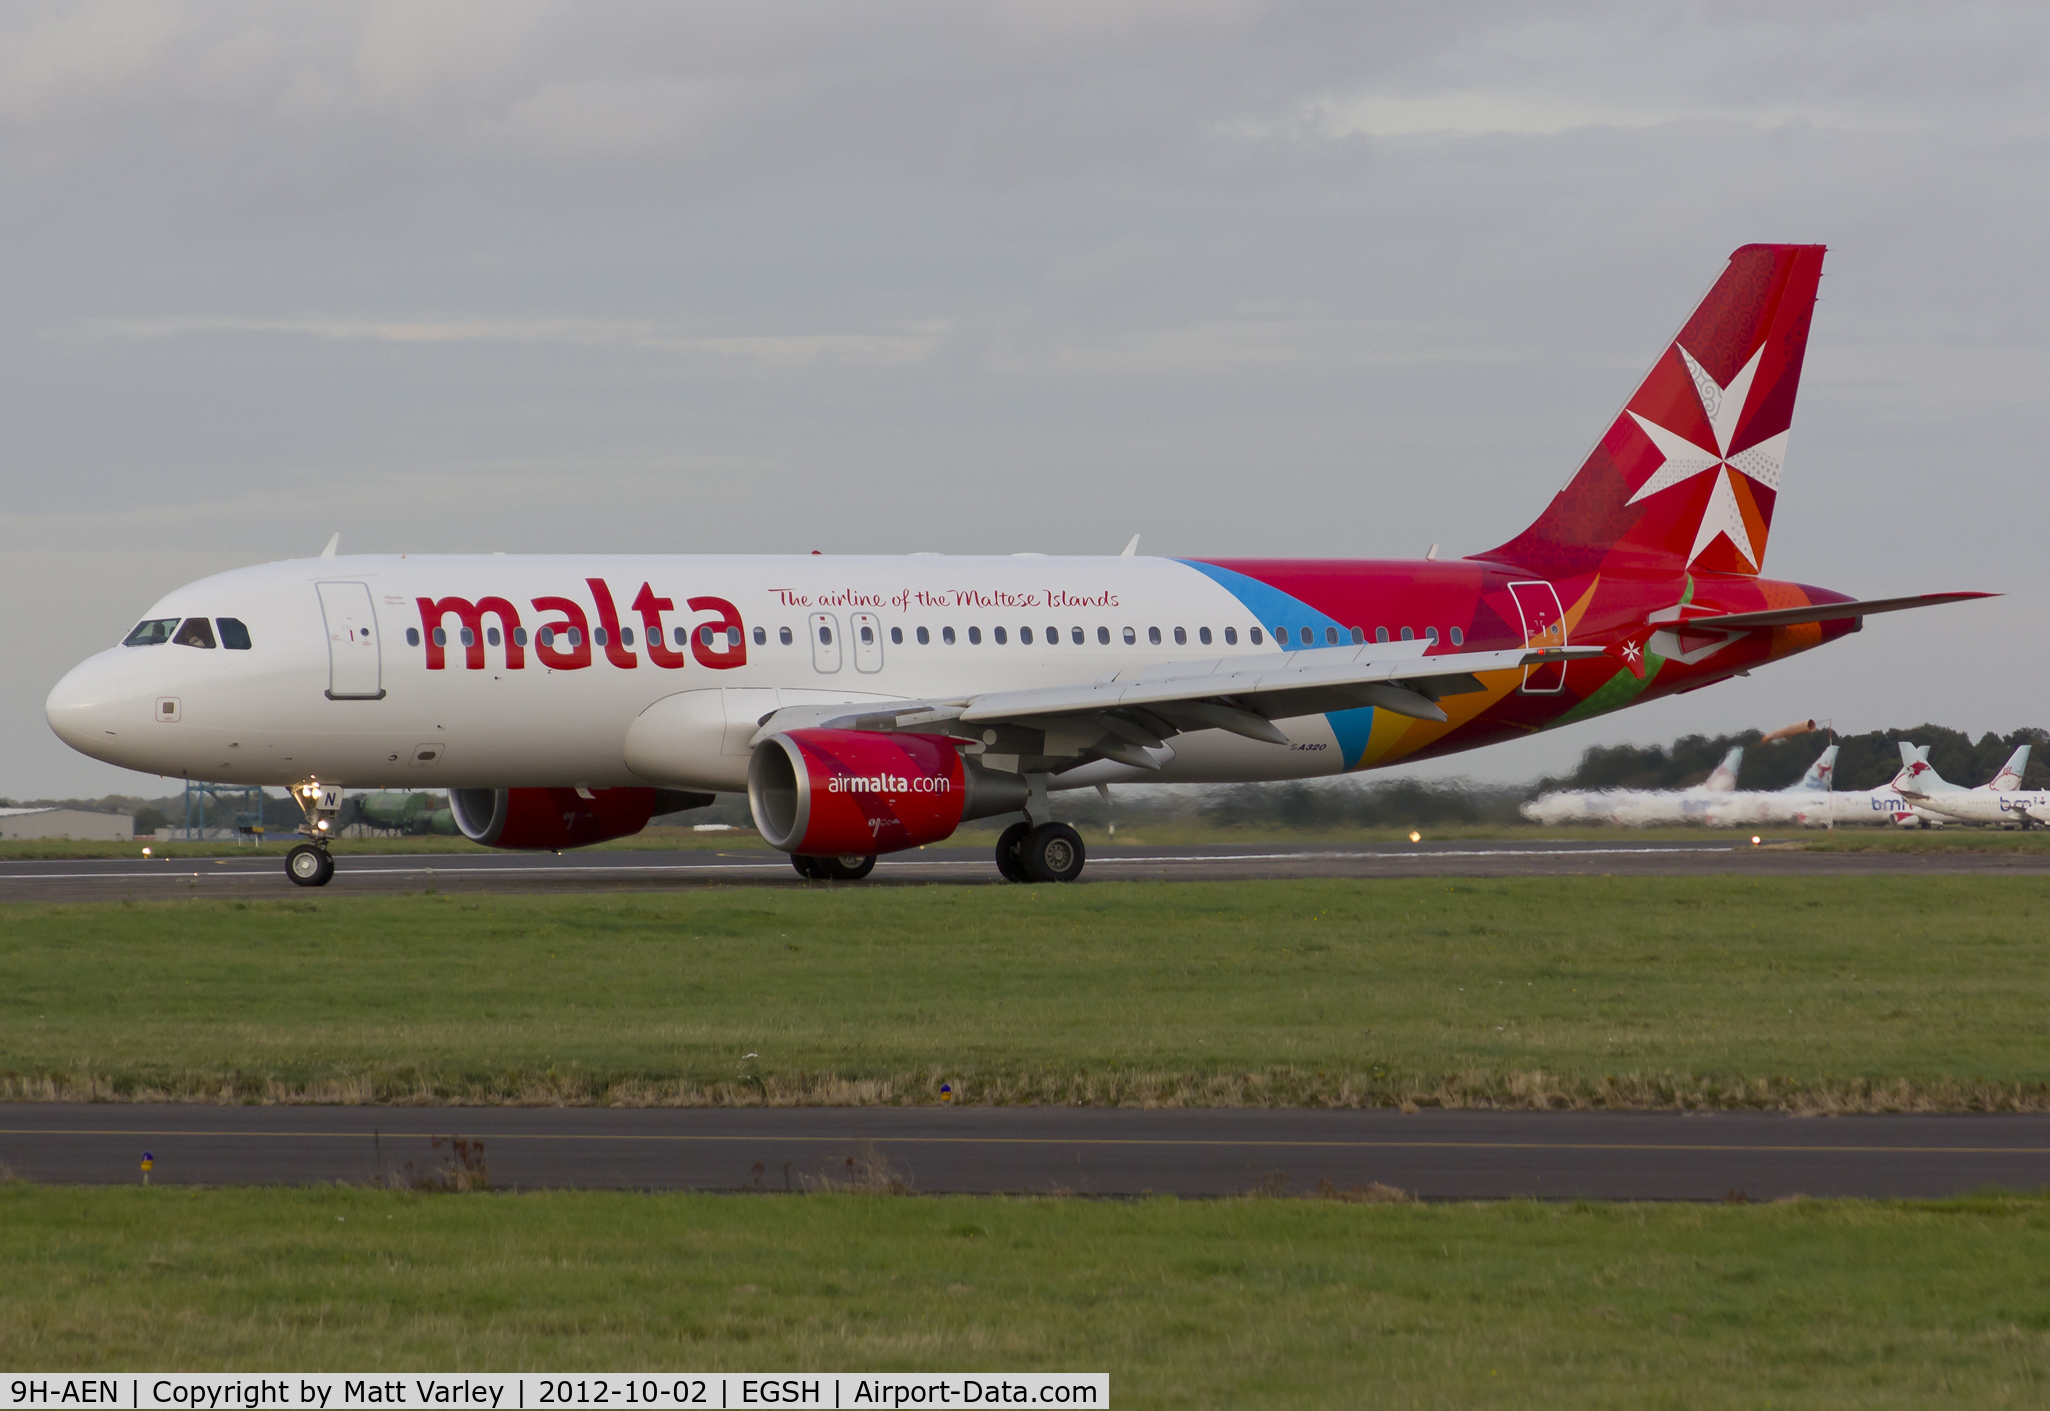 9H-AEN, 2005 Airbus A320-214 C/N 2665, AMC5144 arriving at EGSH in Air Malta's latest livery.